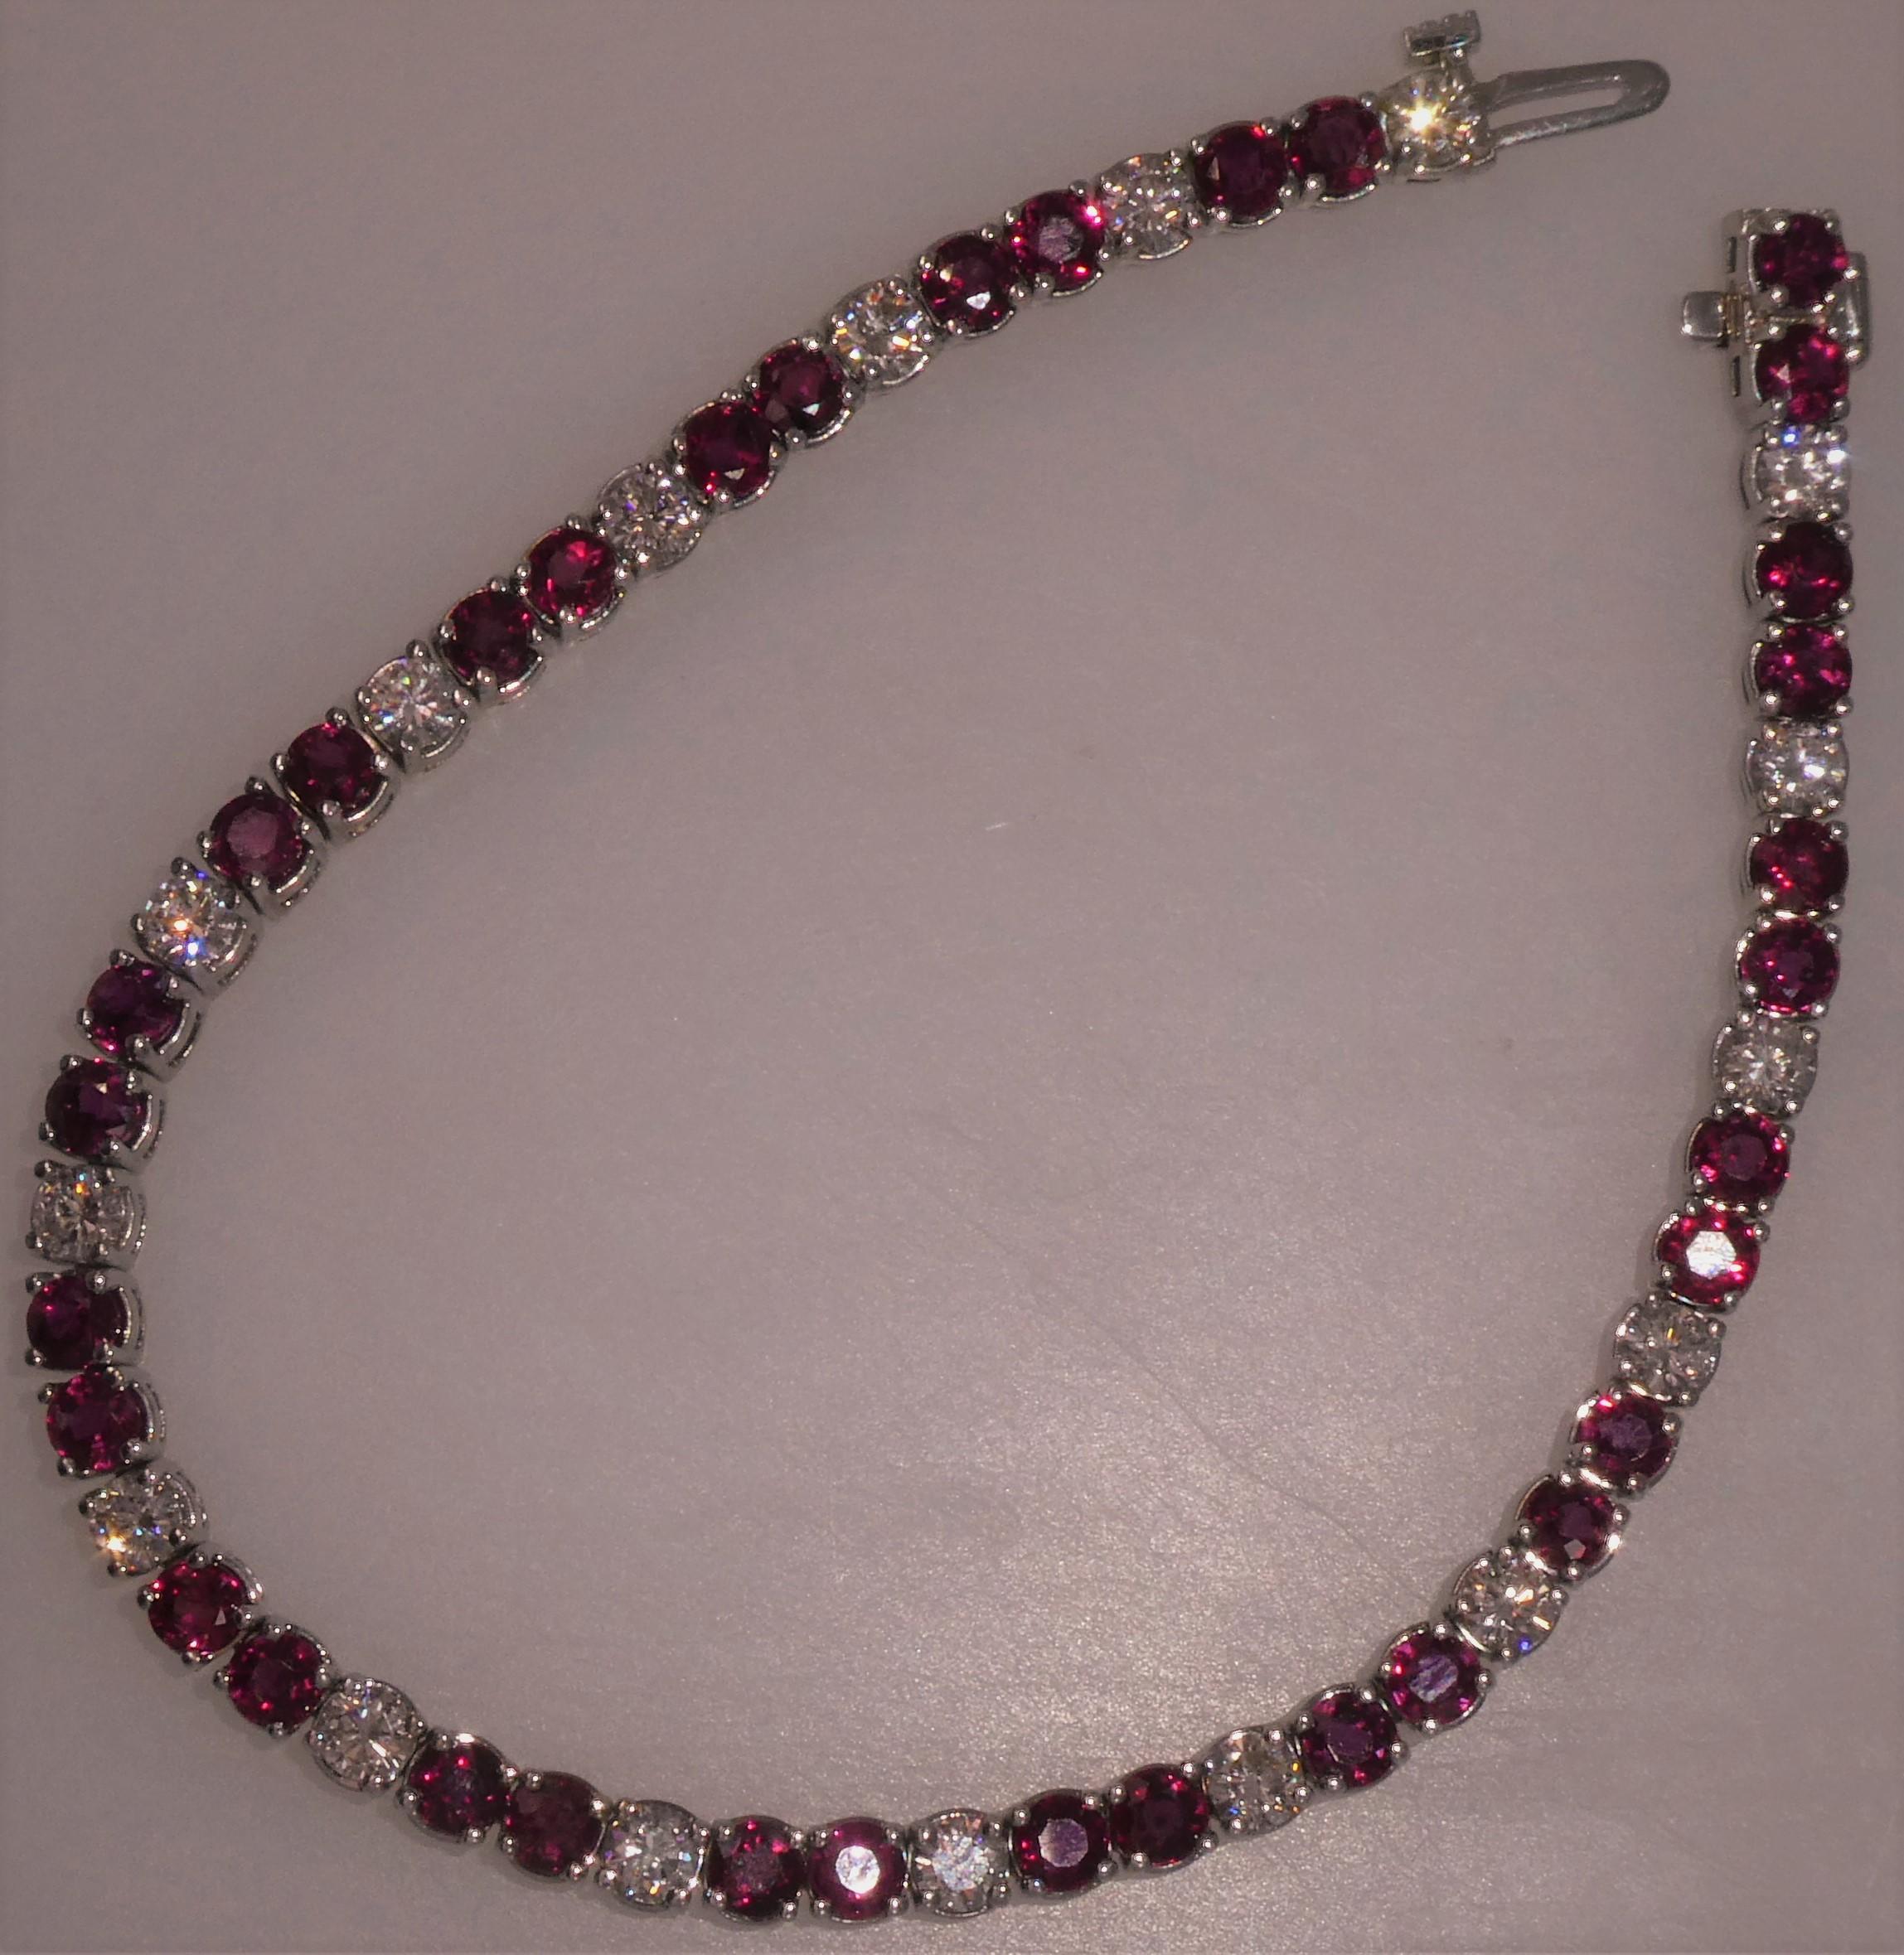 Mounted in 14 Karat White Gold and using very fine Rubies, this bracelet is lively and easy to wear.  Much in the 